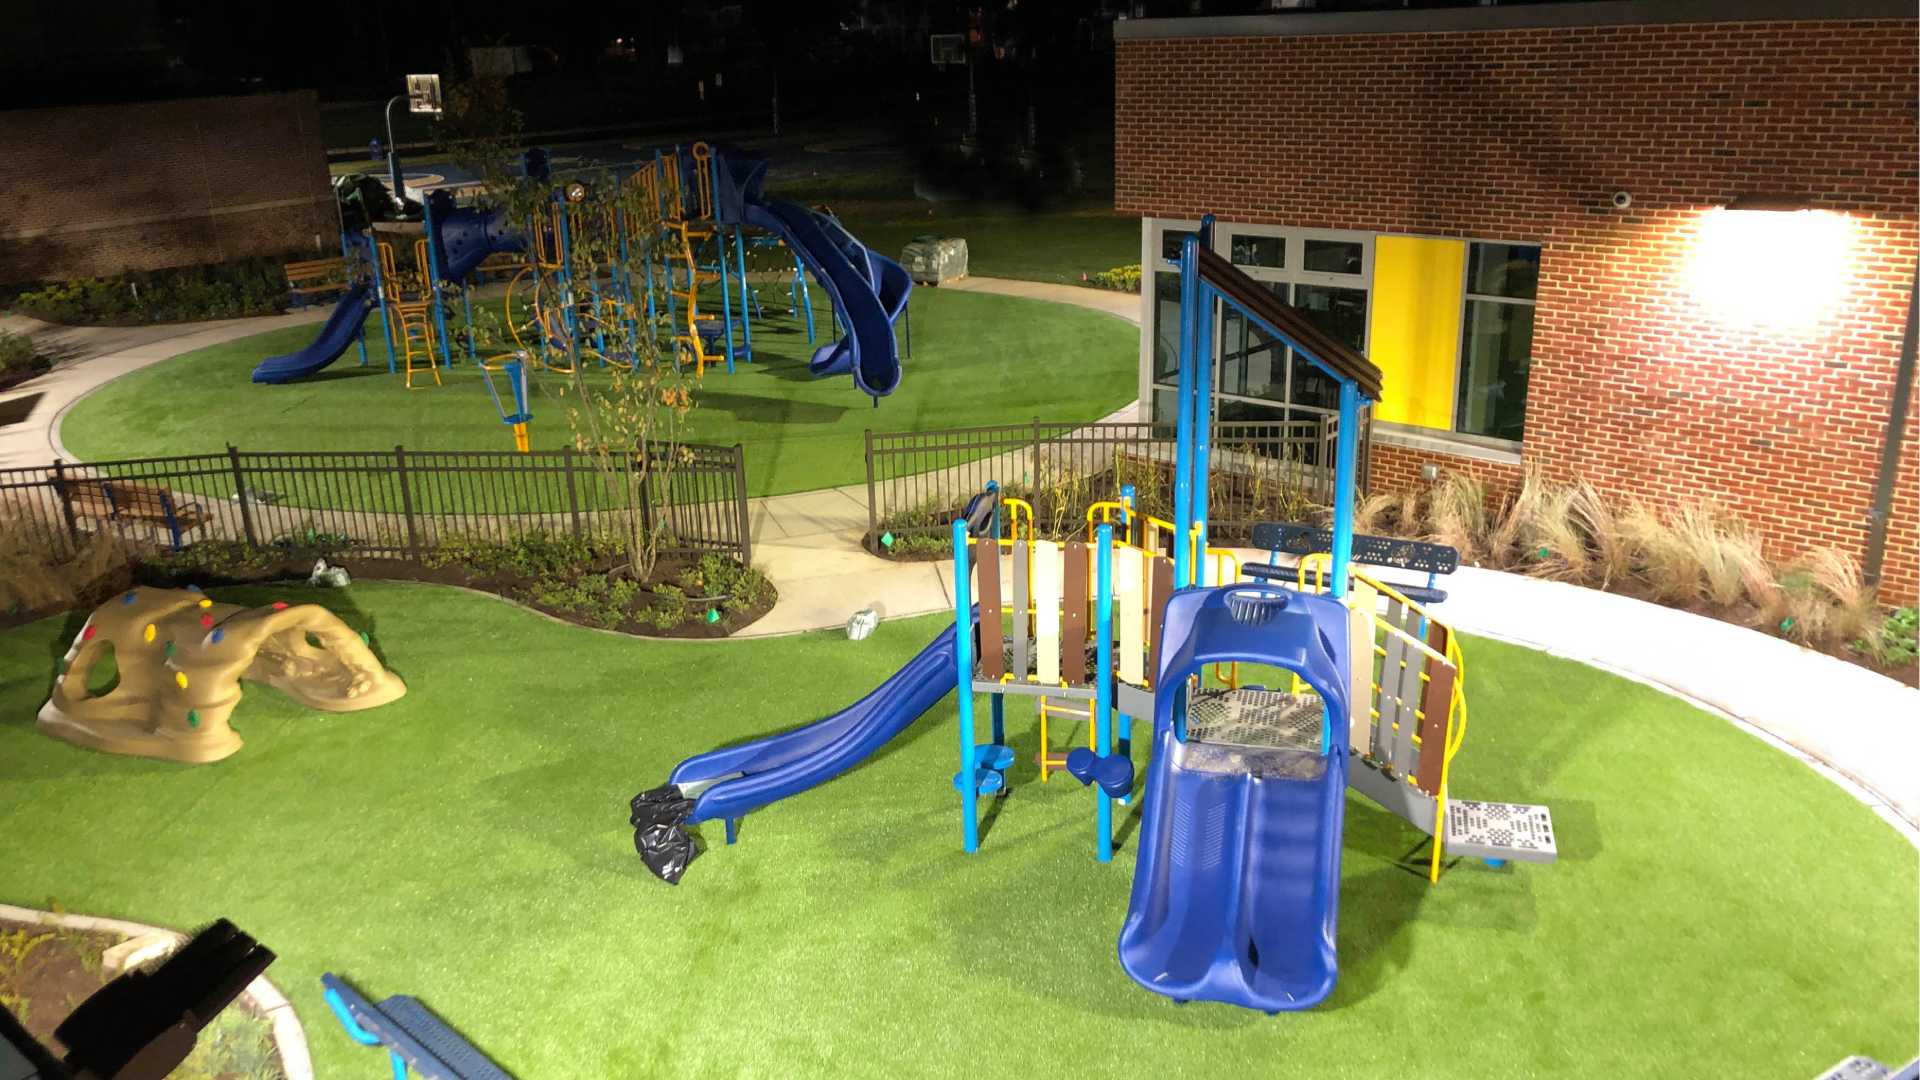 Artificial playground grass is durable for winter